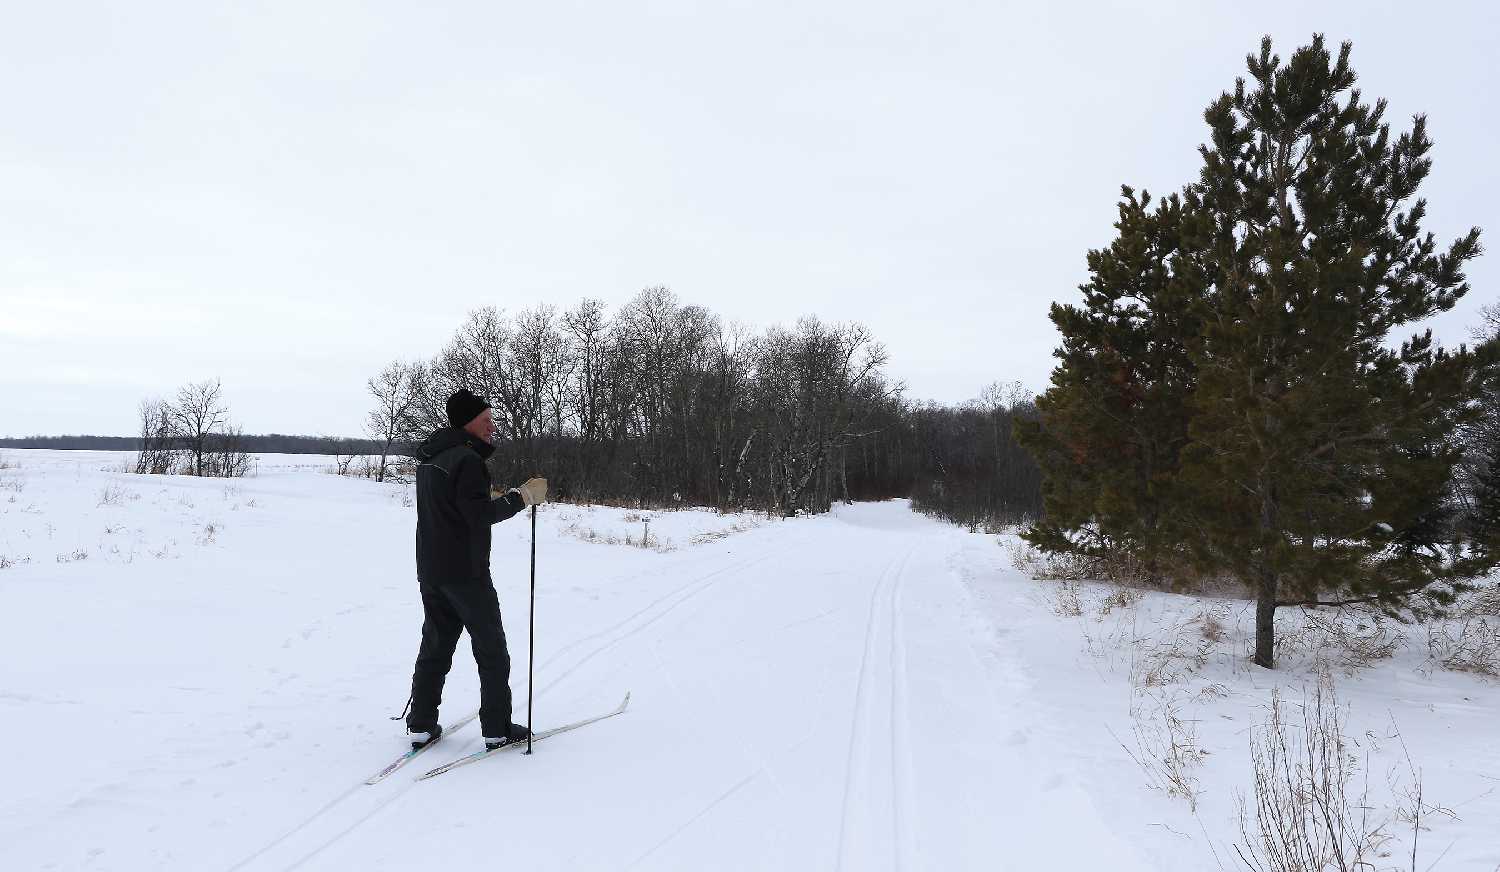 Rocanville Cross-Country Ski Club executive member Dennis Hack, goes skiing almost everyday throughout the different ski trails at Rocanville’s Cross-Country Ski Trails.